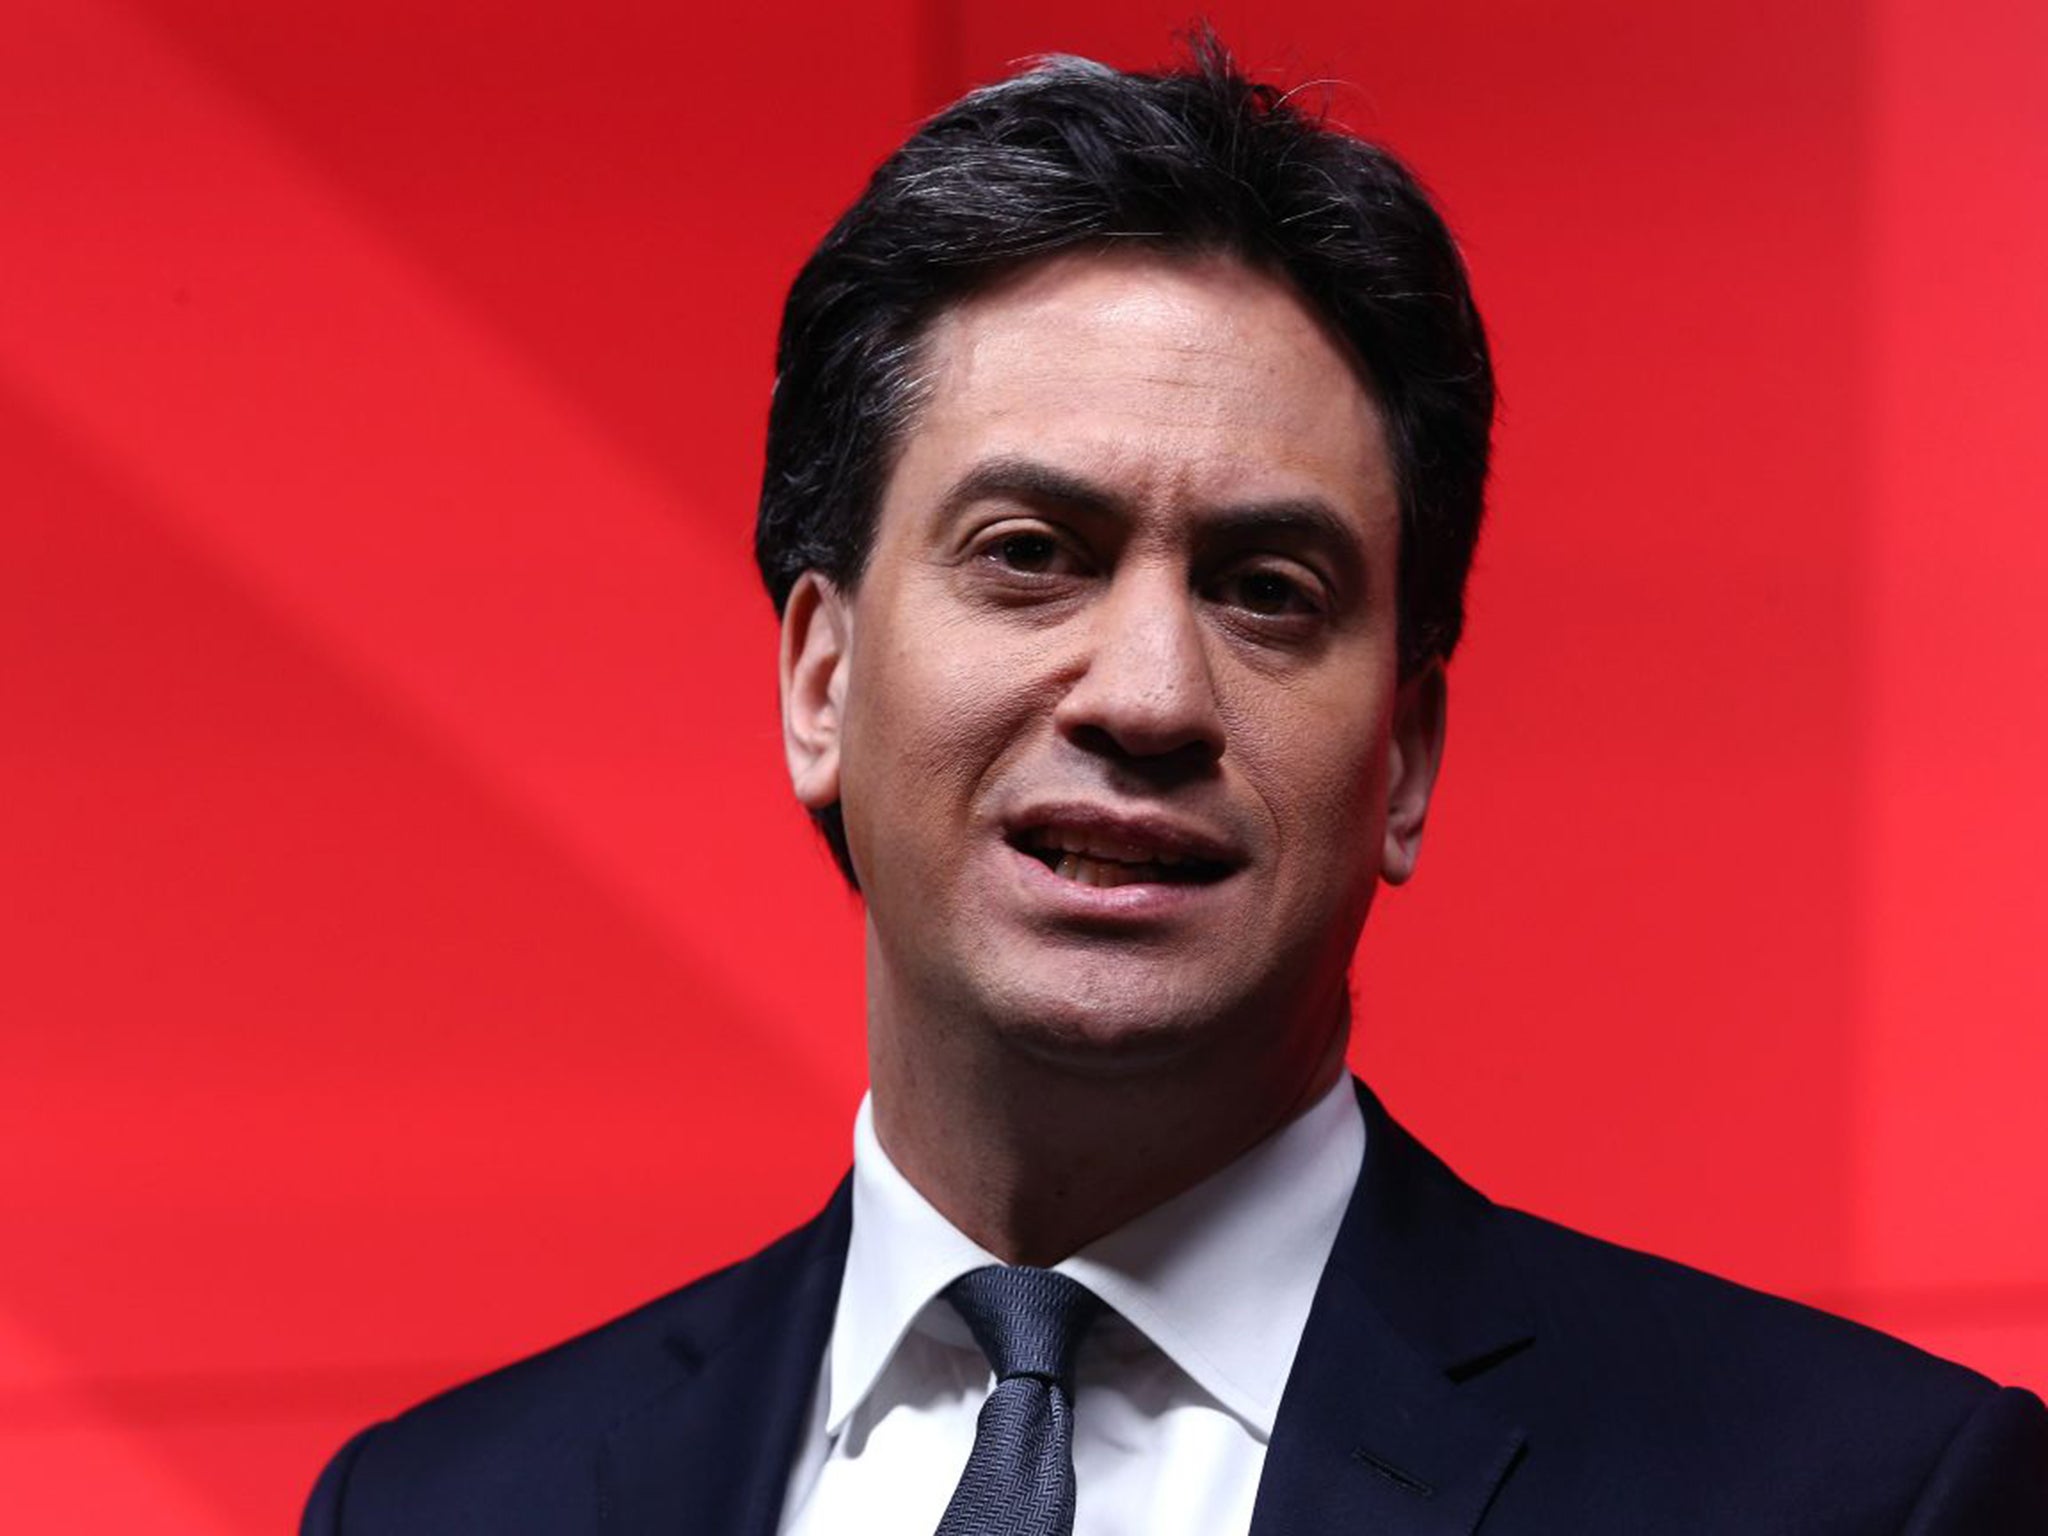 According to the duo, Labour leader Ed Miliband can't be taken seriously